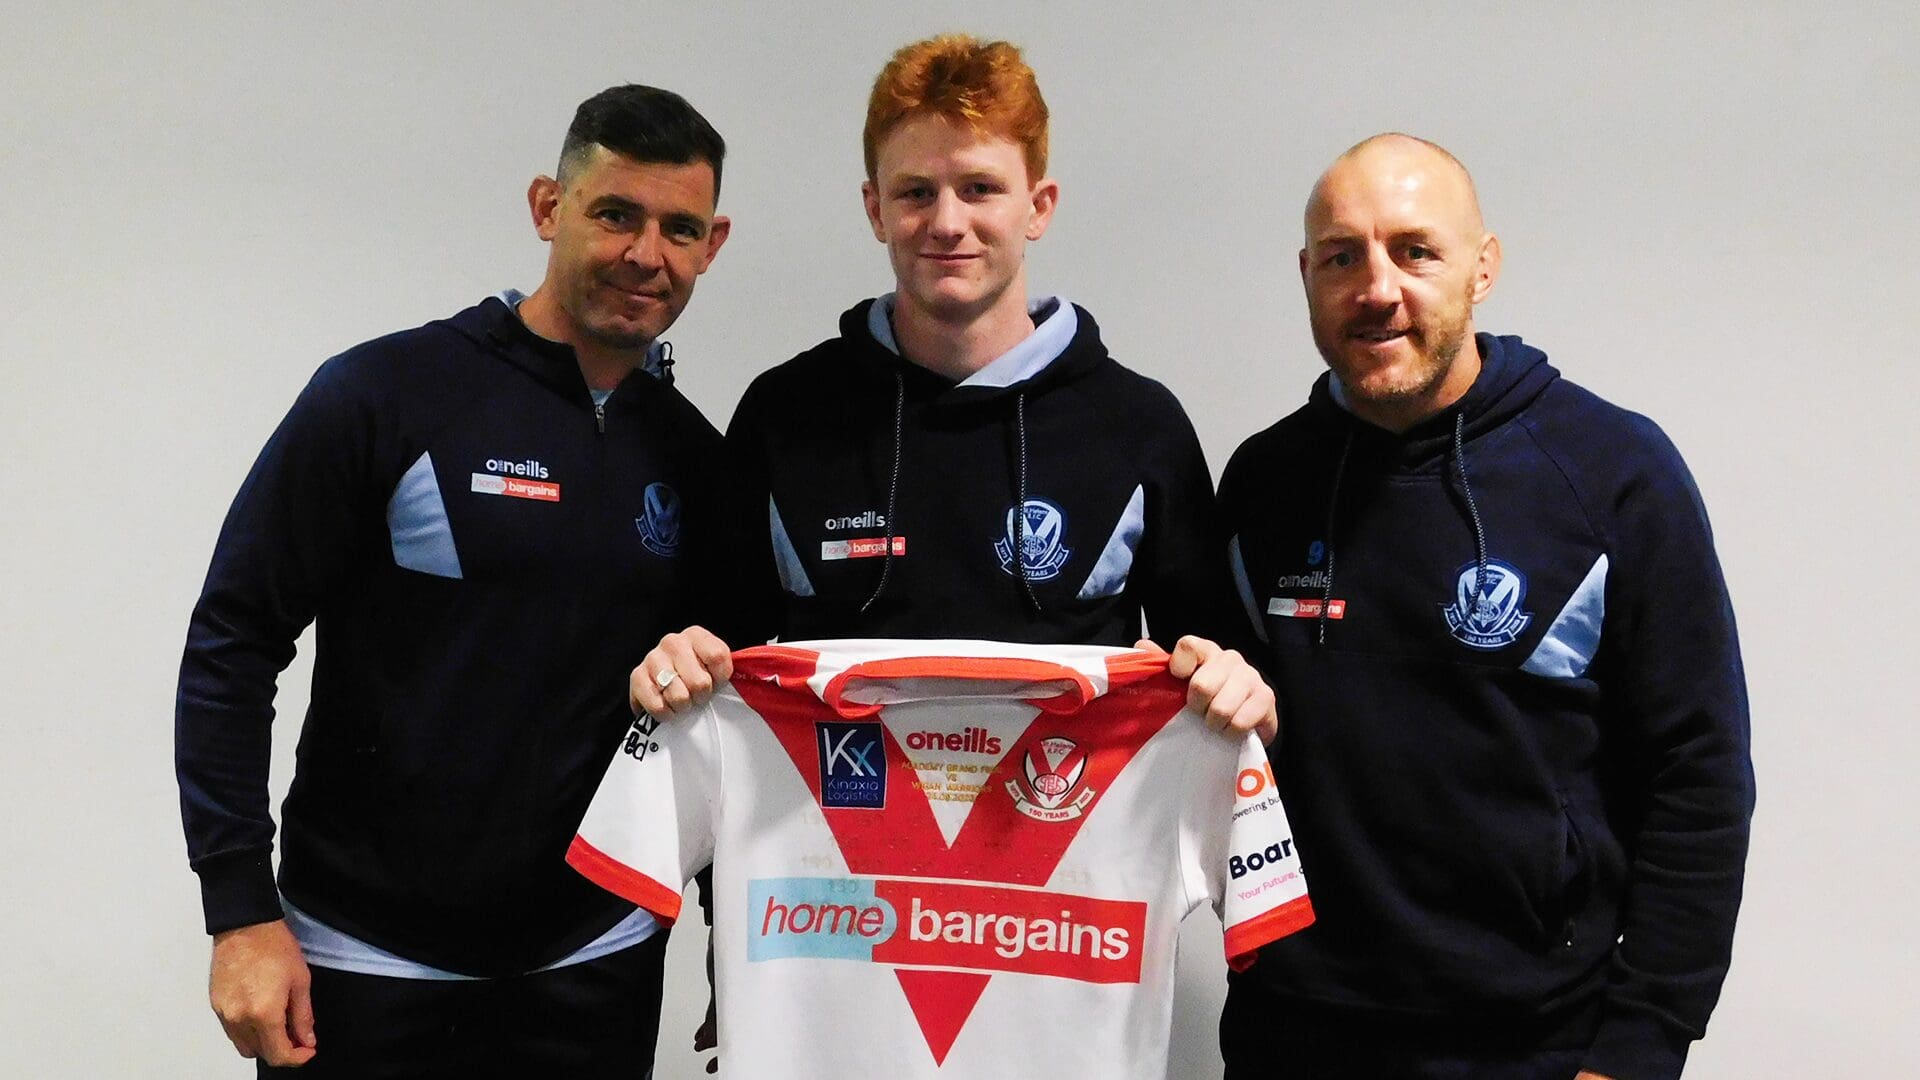 their St.Helens Wellens Grand | Final present Roby & Academy shirts